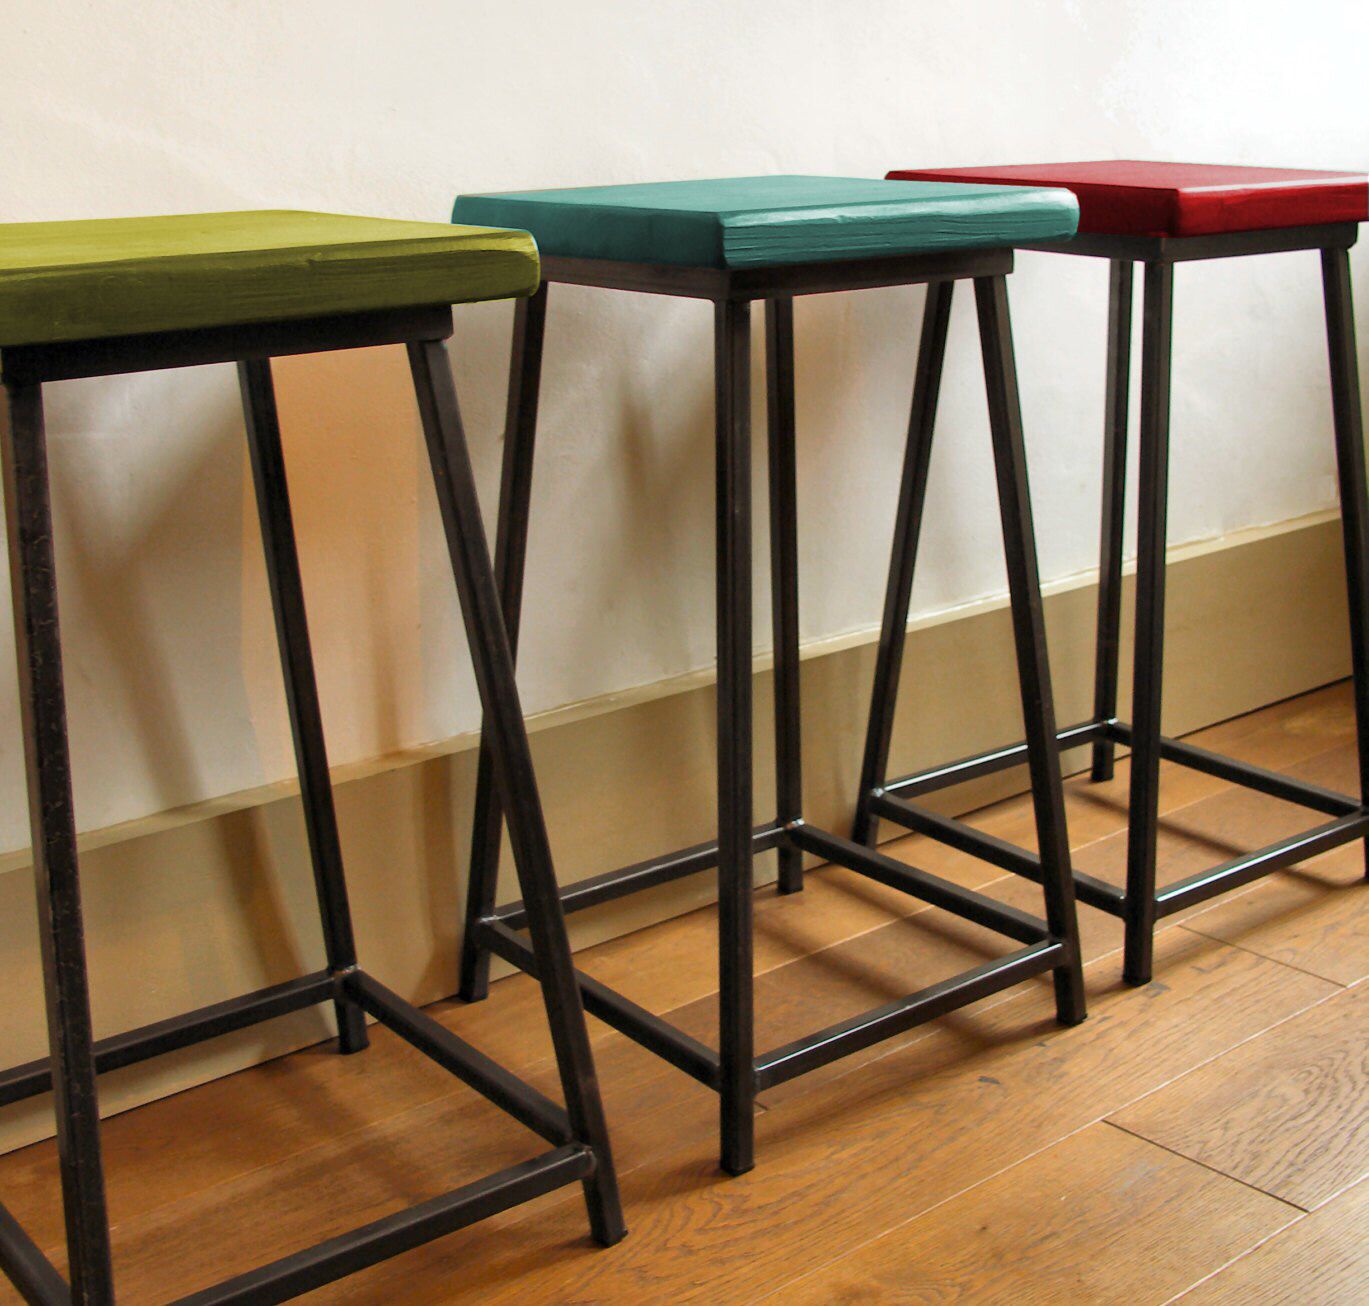 bar stools from the profile